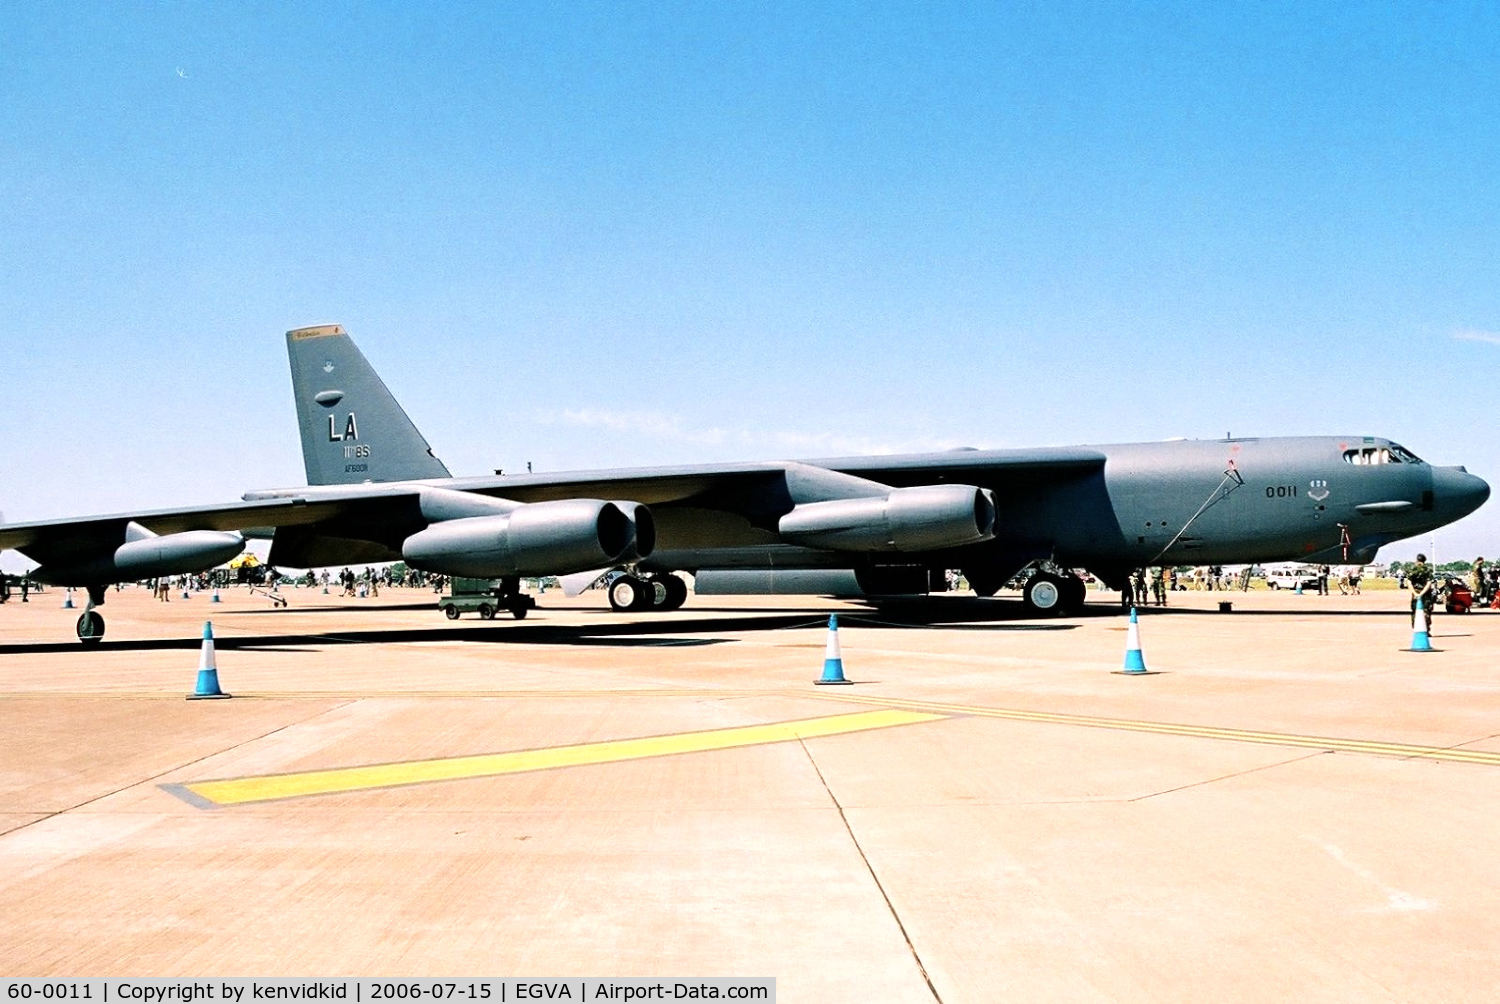 60-0011, 1960 Boeing B-52H Stratofortress C/N 464376, On static display at RIAT.